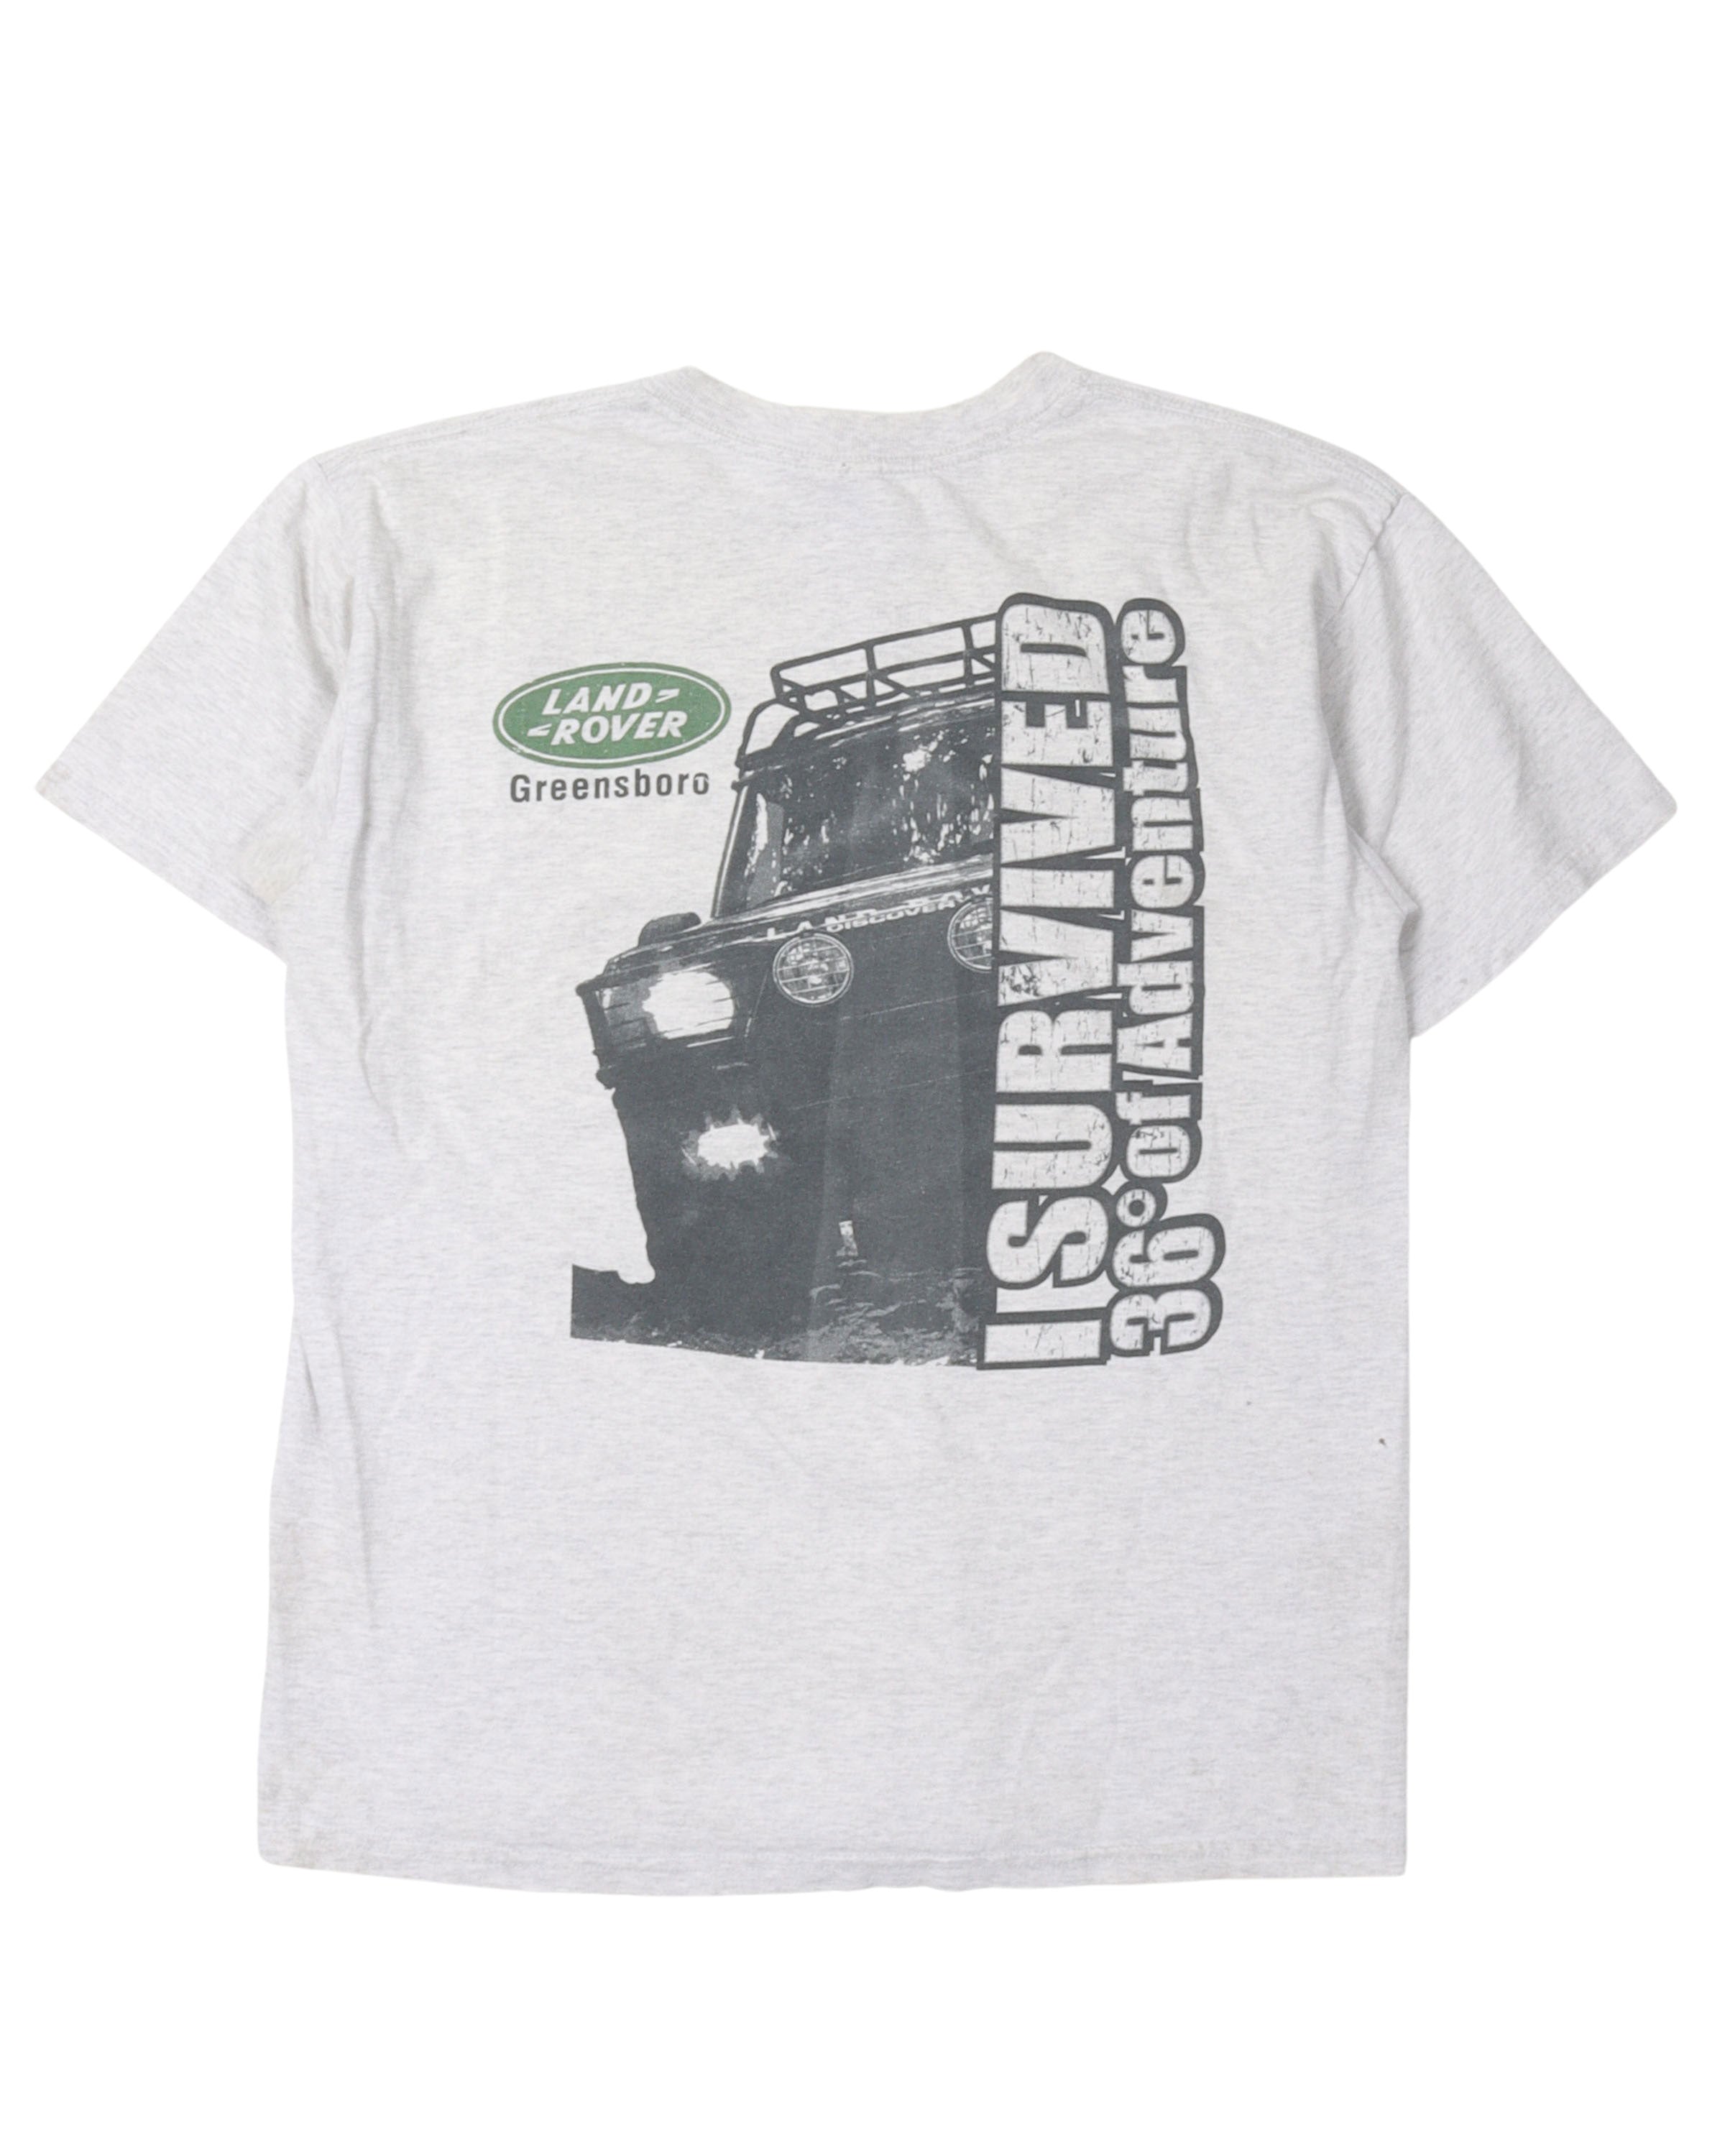 Land Rover Greensboro "I Survived 36° of Adventure" T-Shirt